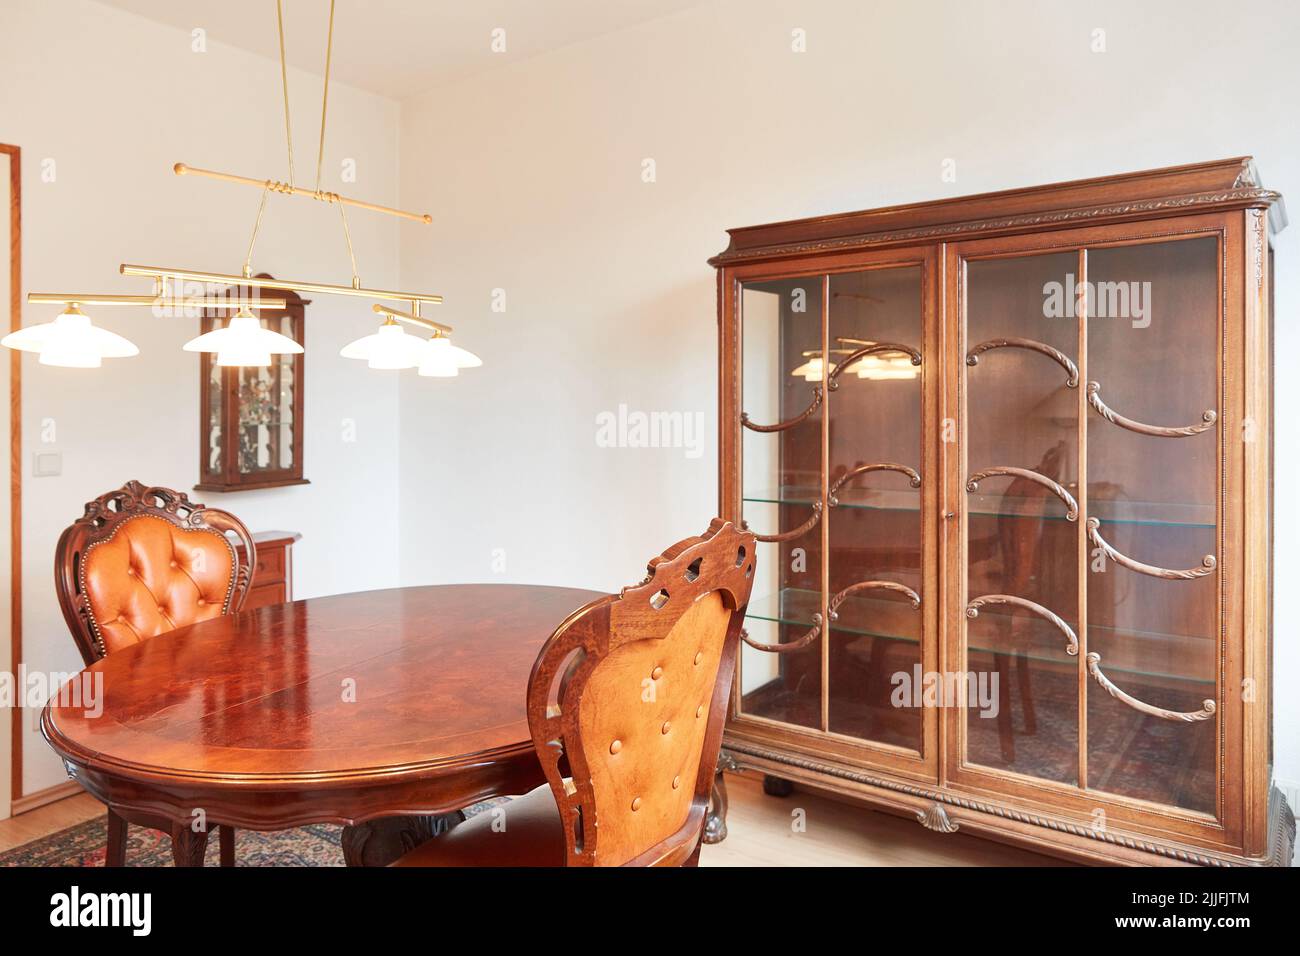 Antique dining table in dining room with retro look furniture Stock Photo